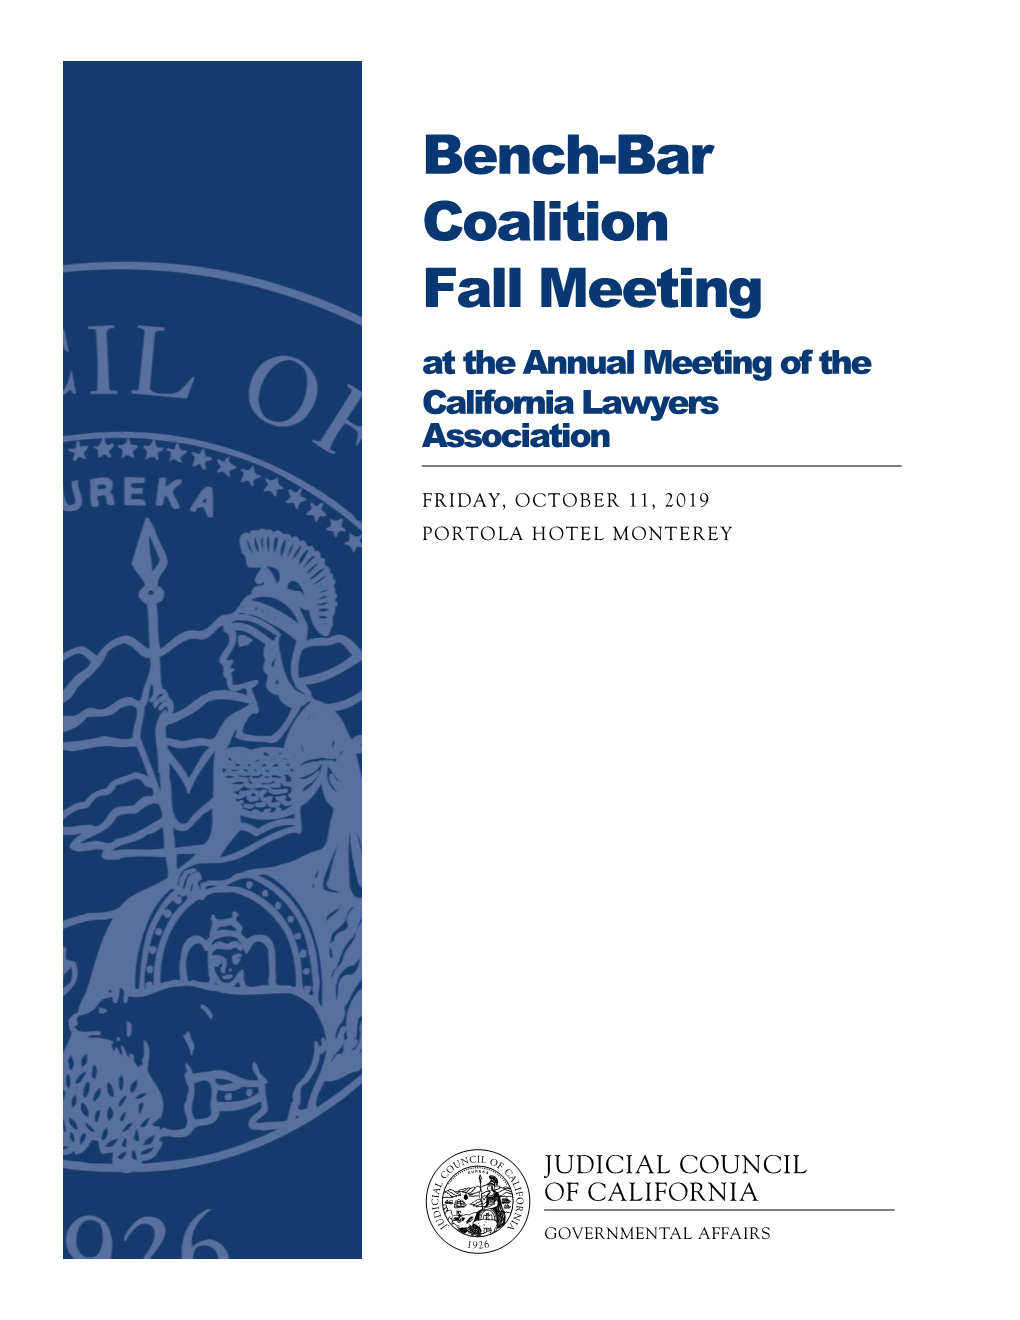 Bench-Bar Coalition Fall Meeting at the Annual Meeting of the California Lawyers Association